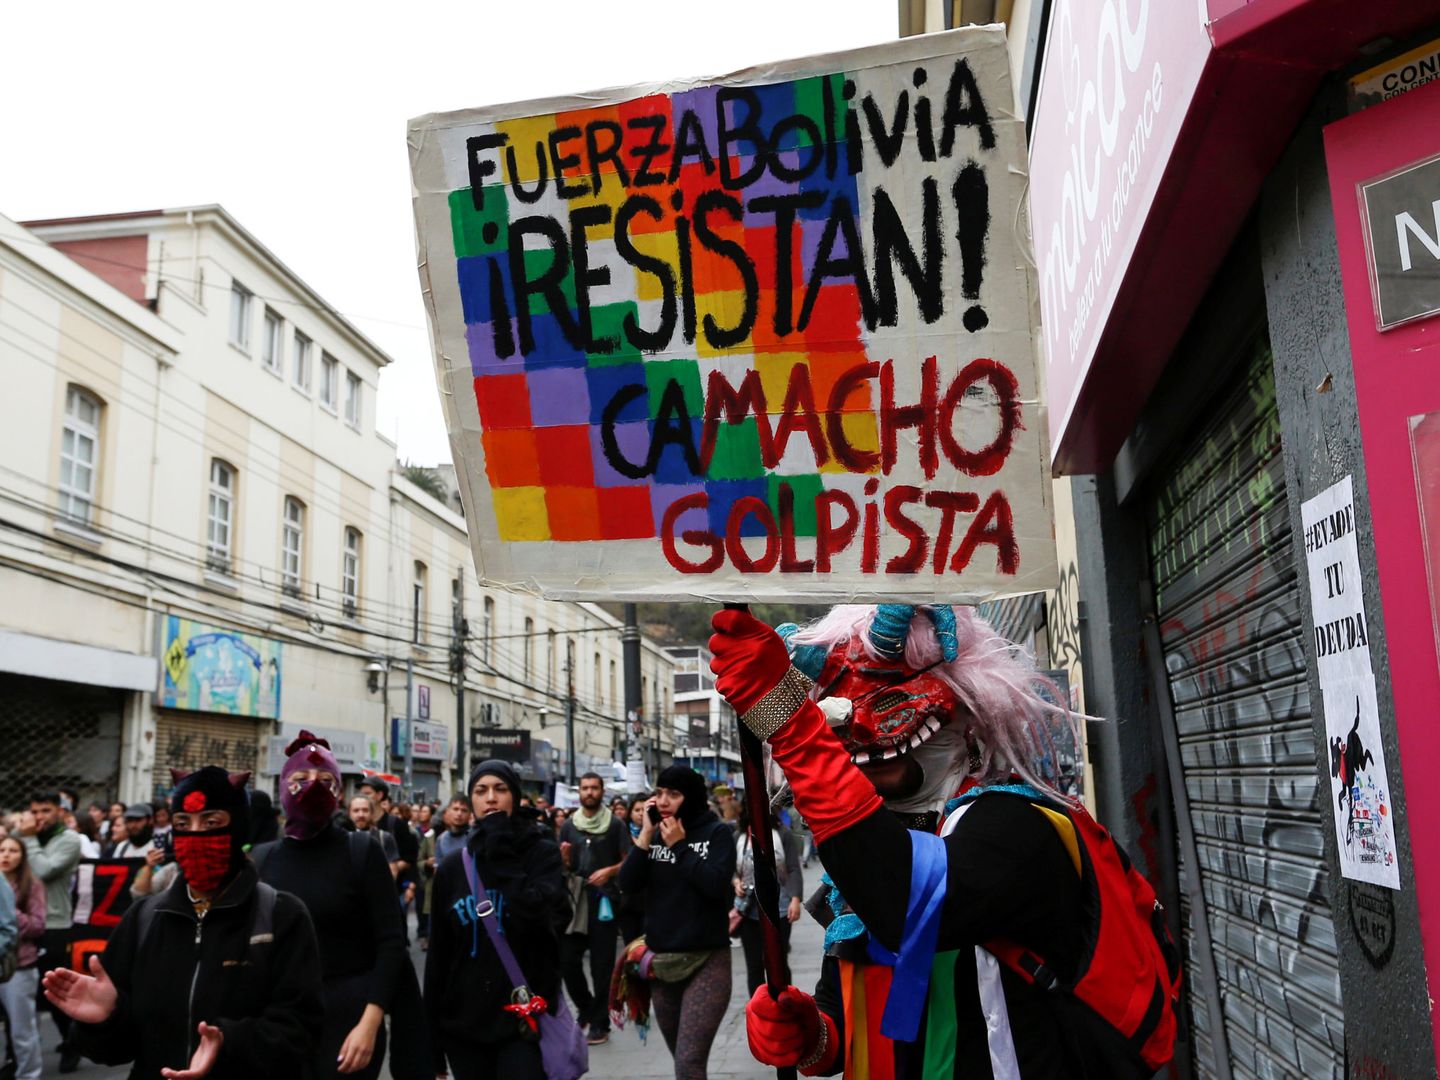 A demonstrator holds a placard that reads 'Bolivia Force, Resist, Camacho coup' during a protest against Chile's government in Valparaiso, Chile  November 12, 2019. REUTERS Rodrigo Garrido